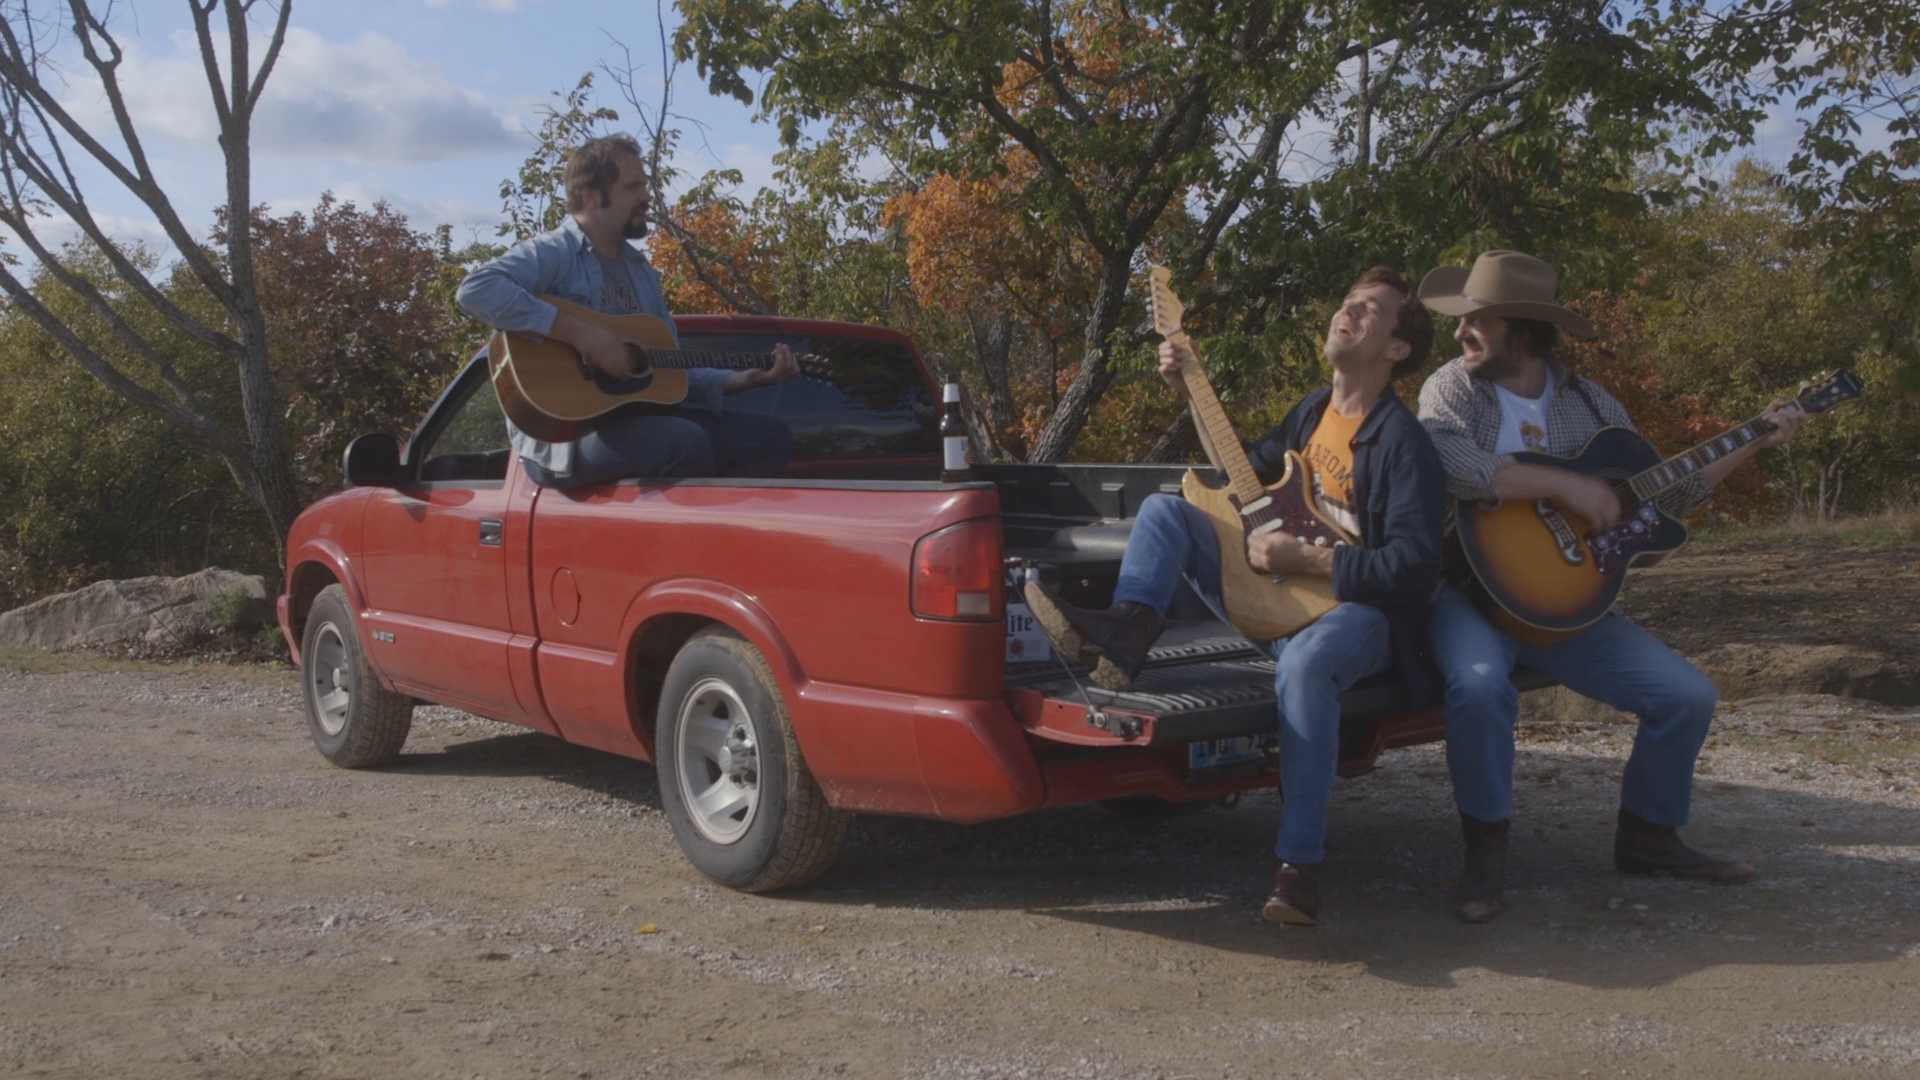 Three men, musicians, sit in the back of a red pickup truck parked on the side of a country lane